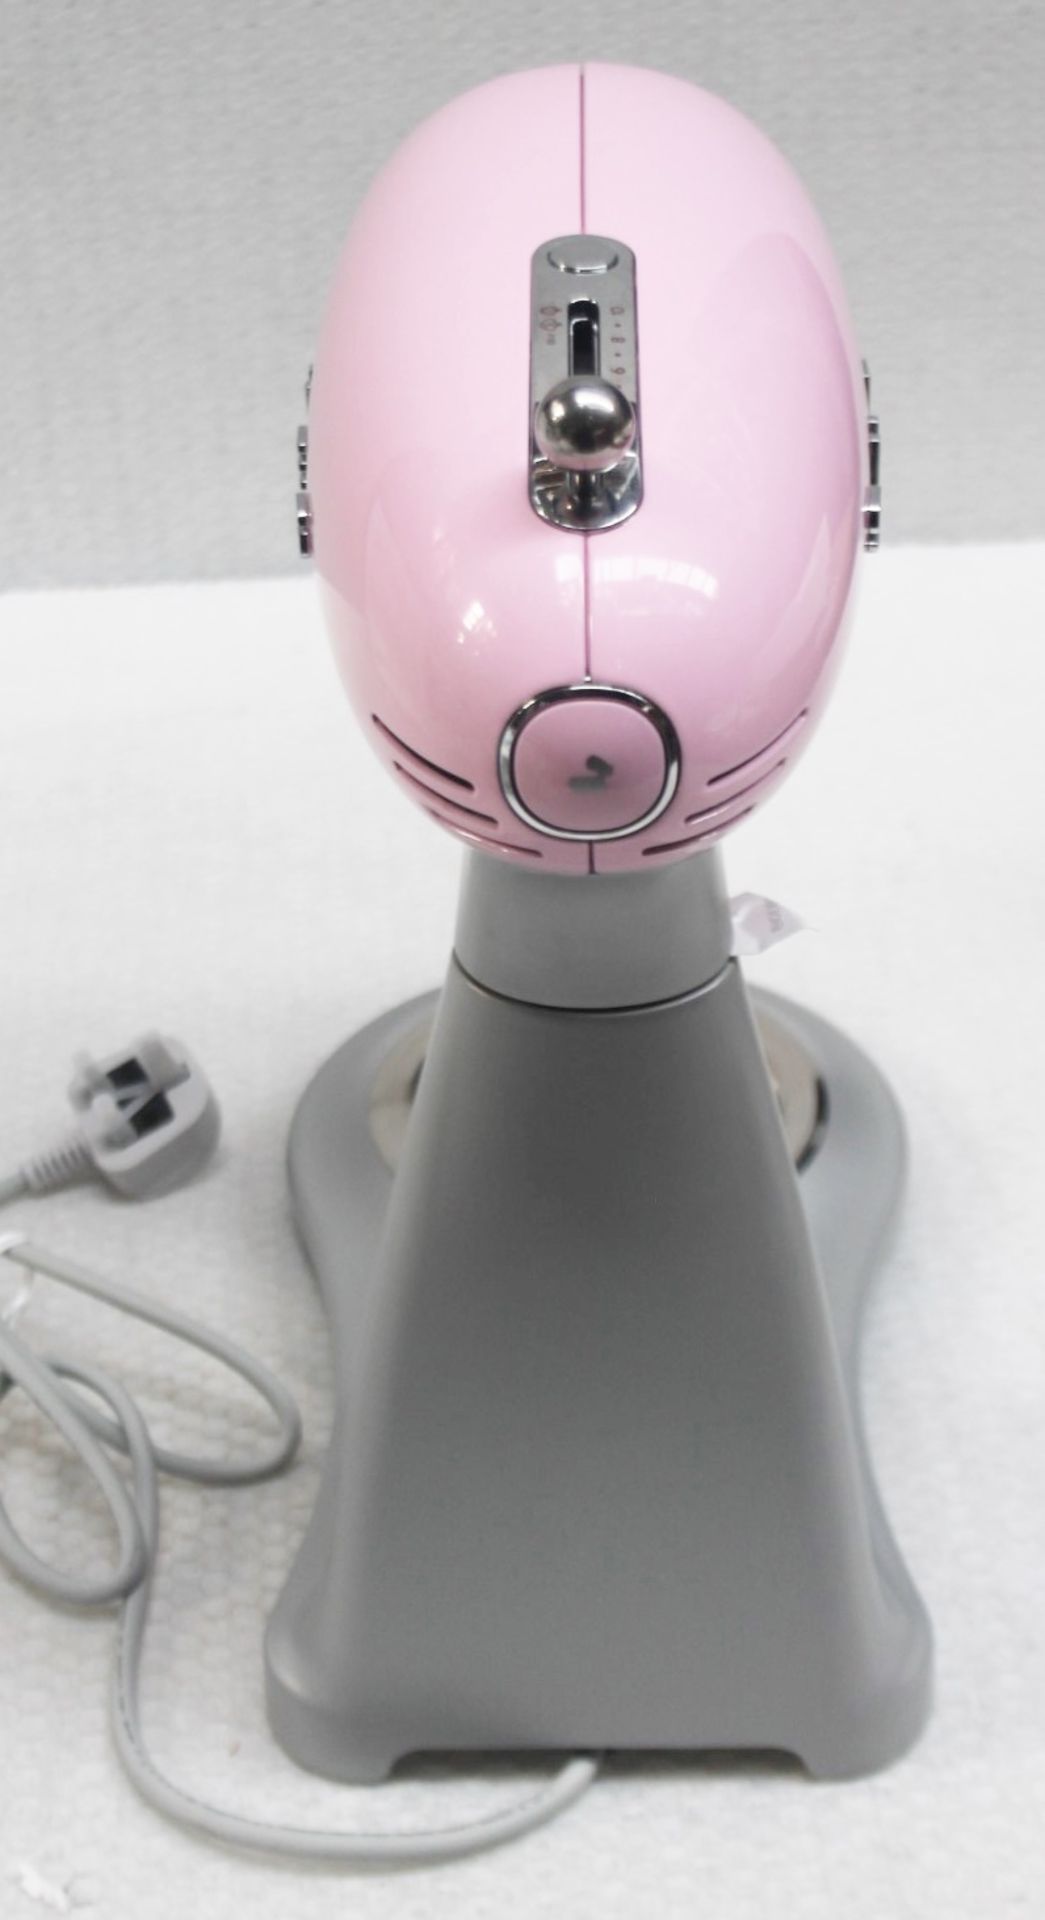 1 x SMEG 50's Retro Stand Mixer In Pink With 4.8 Litre Bowl And Accessories - RRP £499.00 - Image 6 of 14